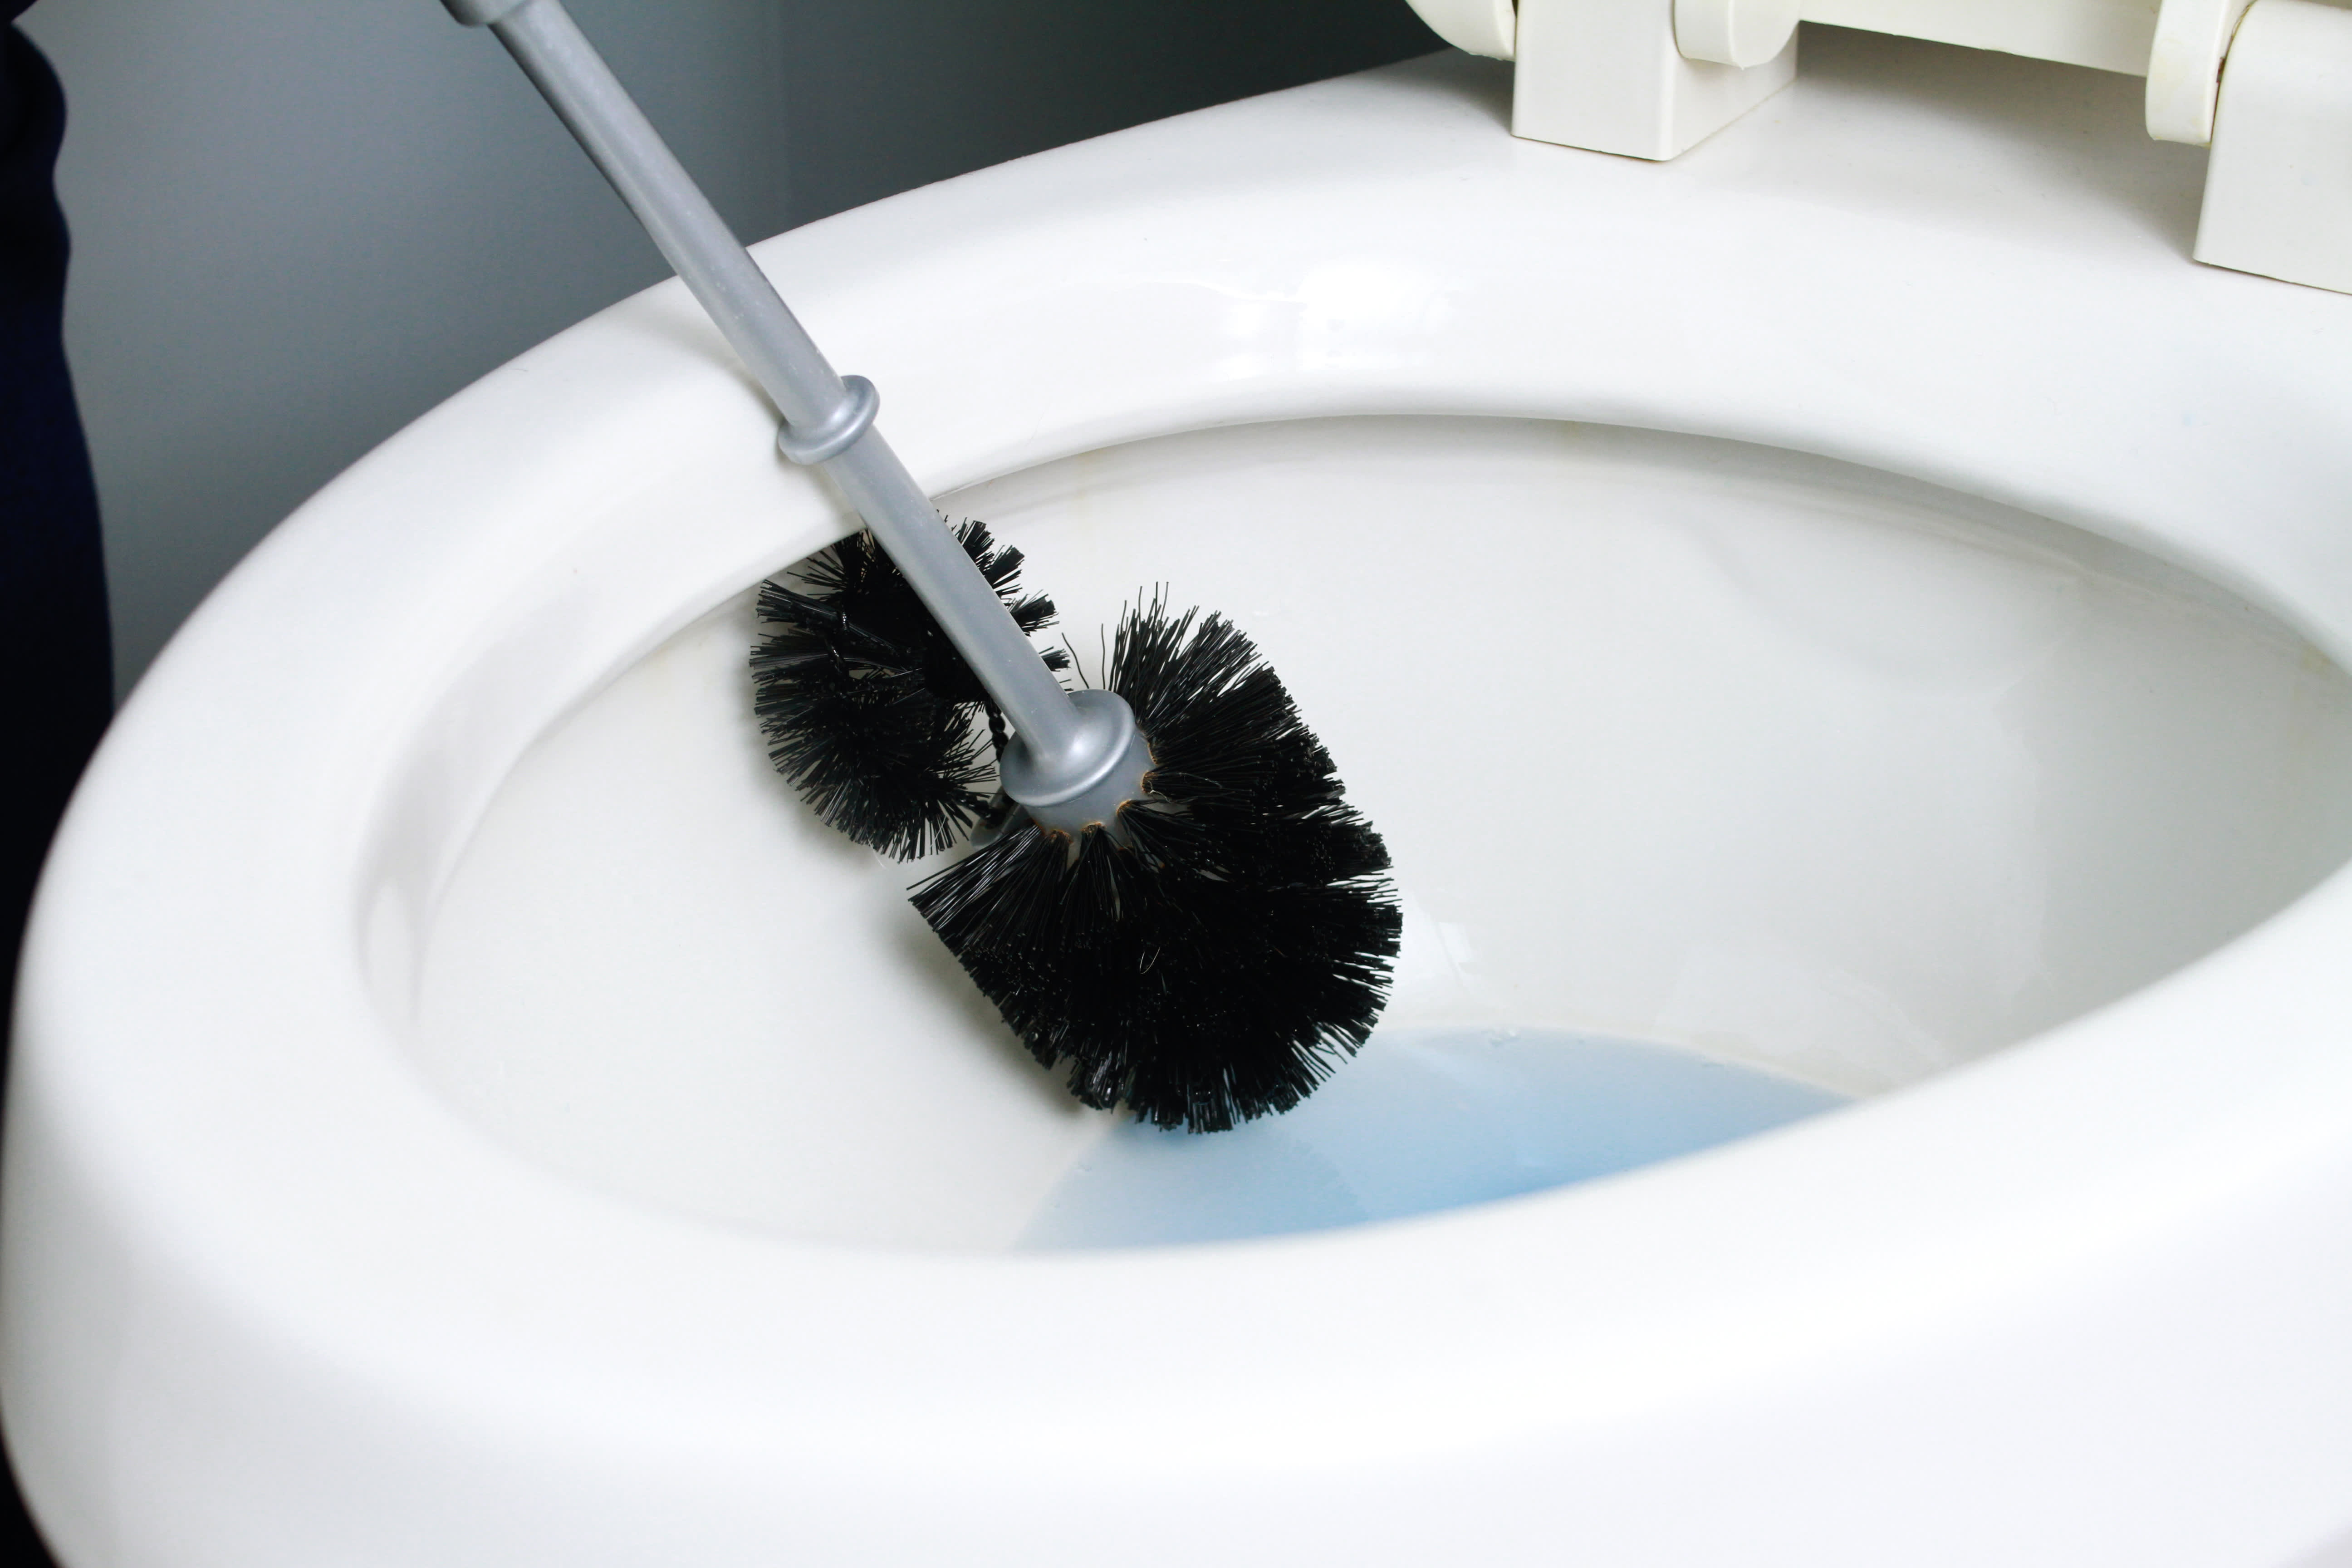 Where would you use these tiny little brushes in your bathroom